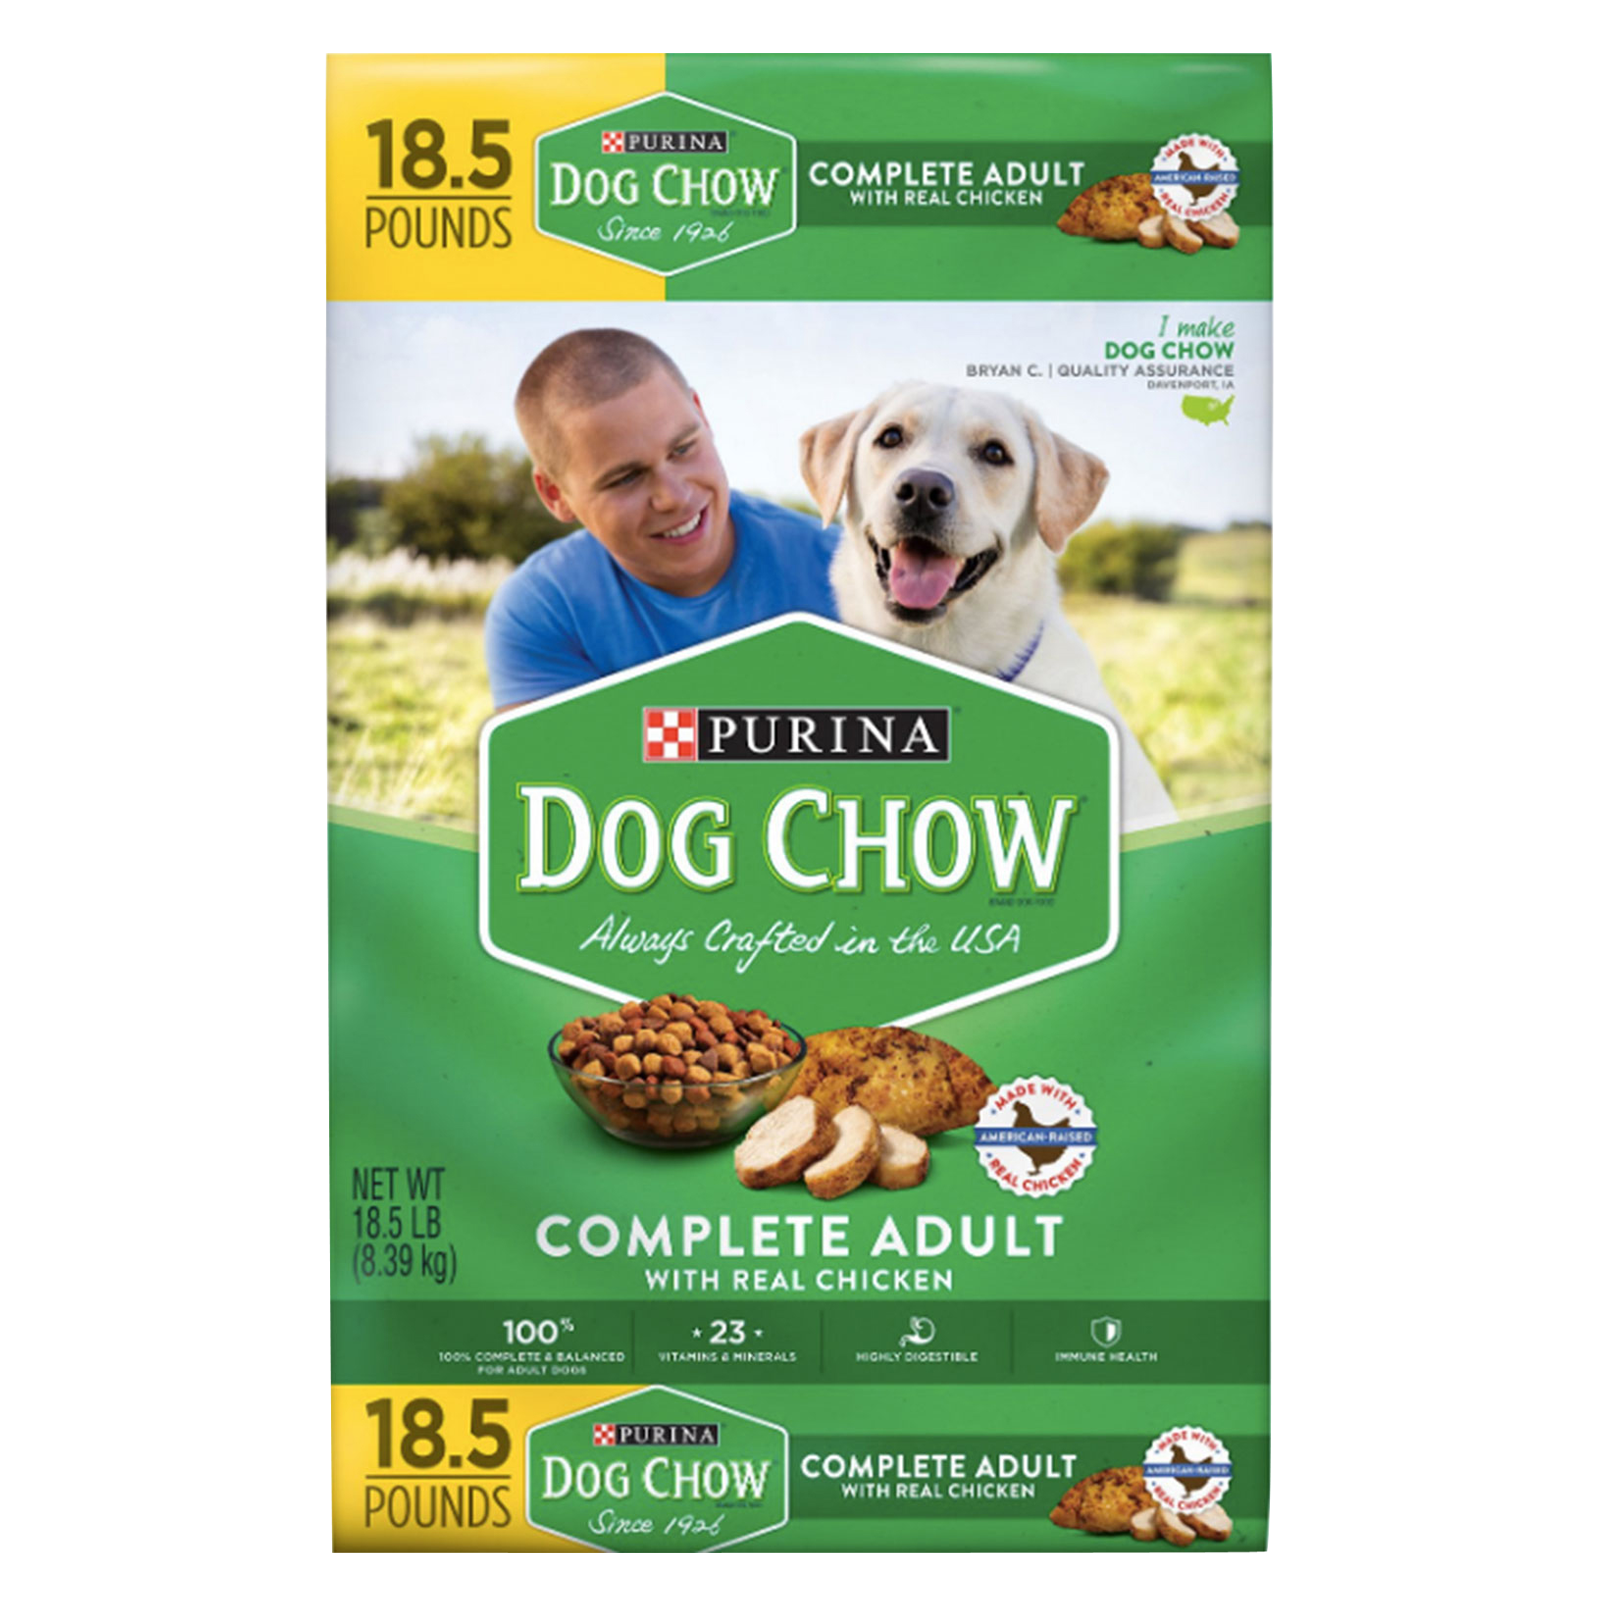 Purina Dog Chow Complete Adult Dry Dog Food 18.5lb